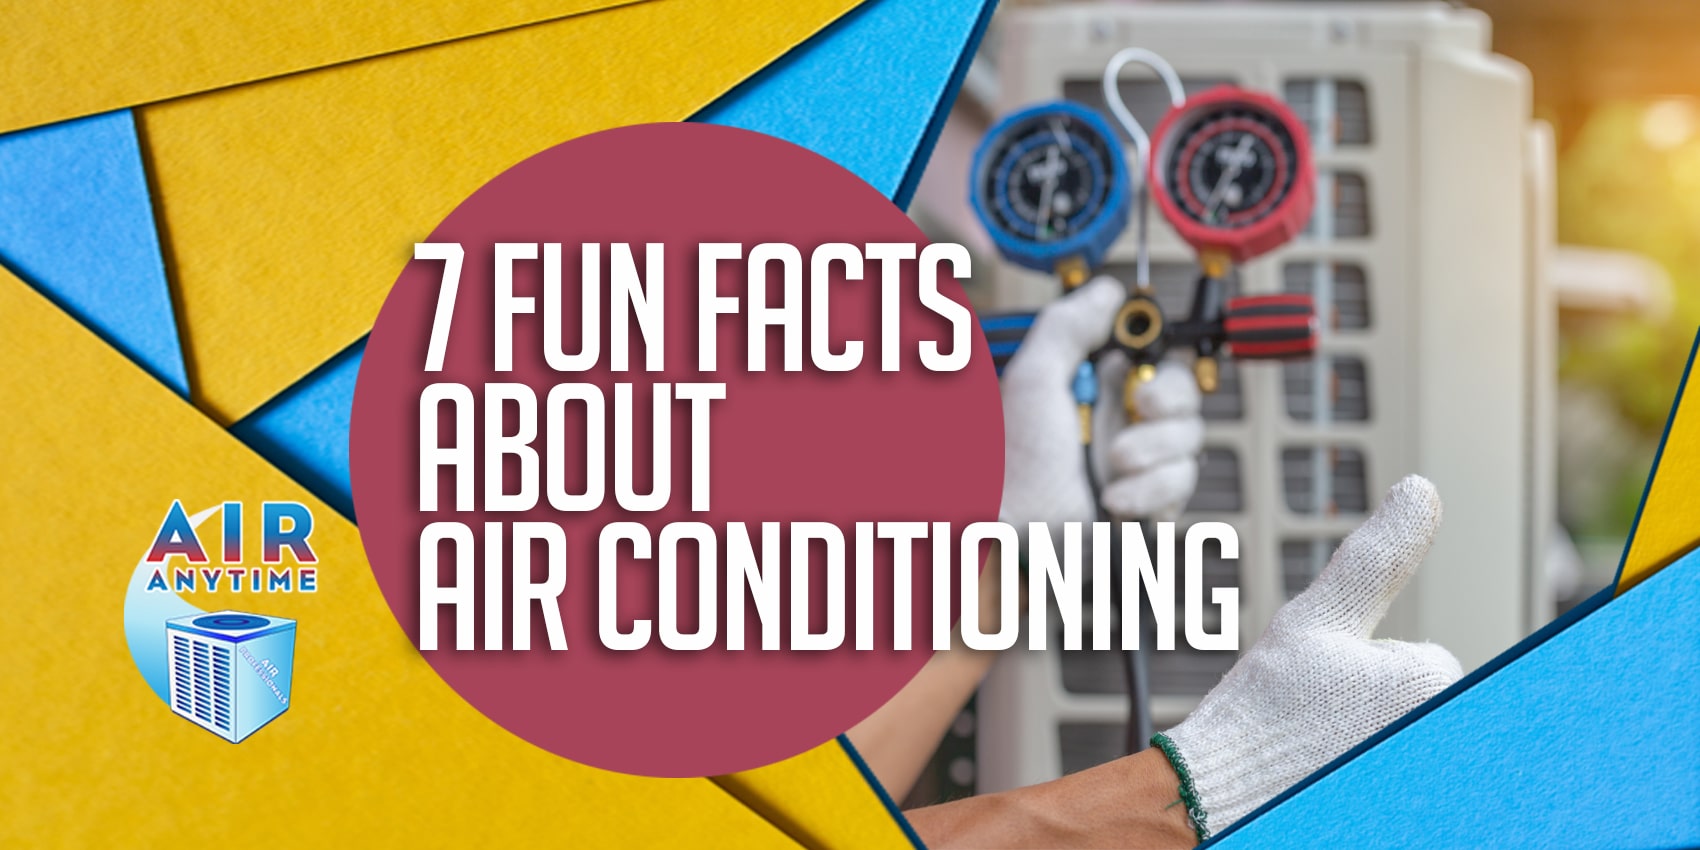 7 Fun Facts About Air Conditioning